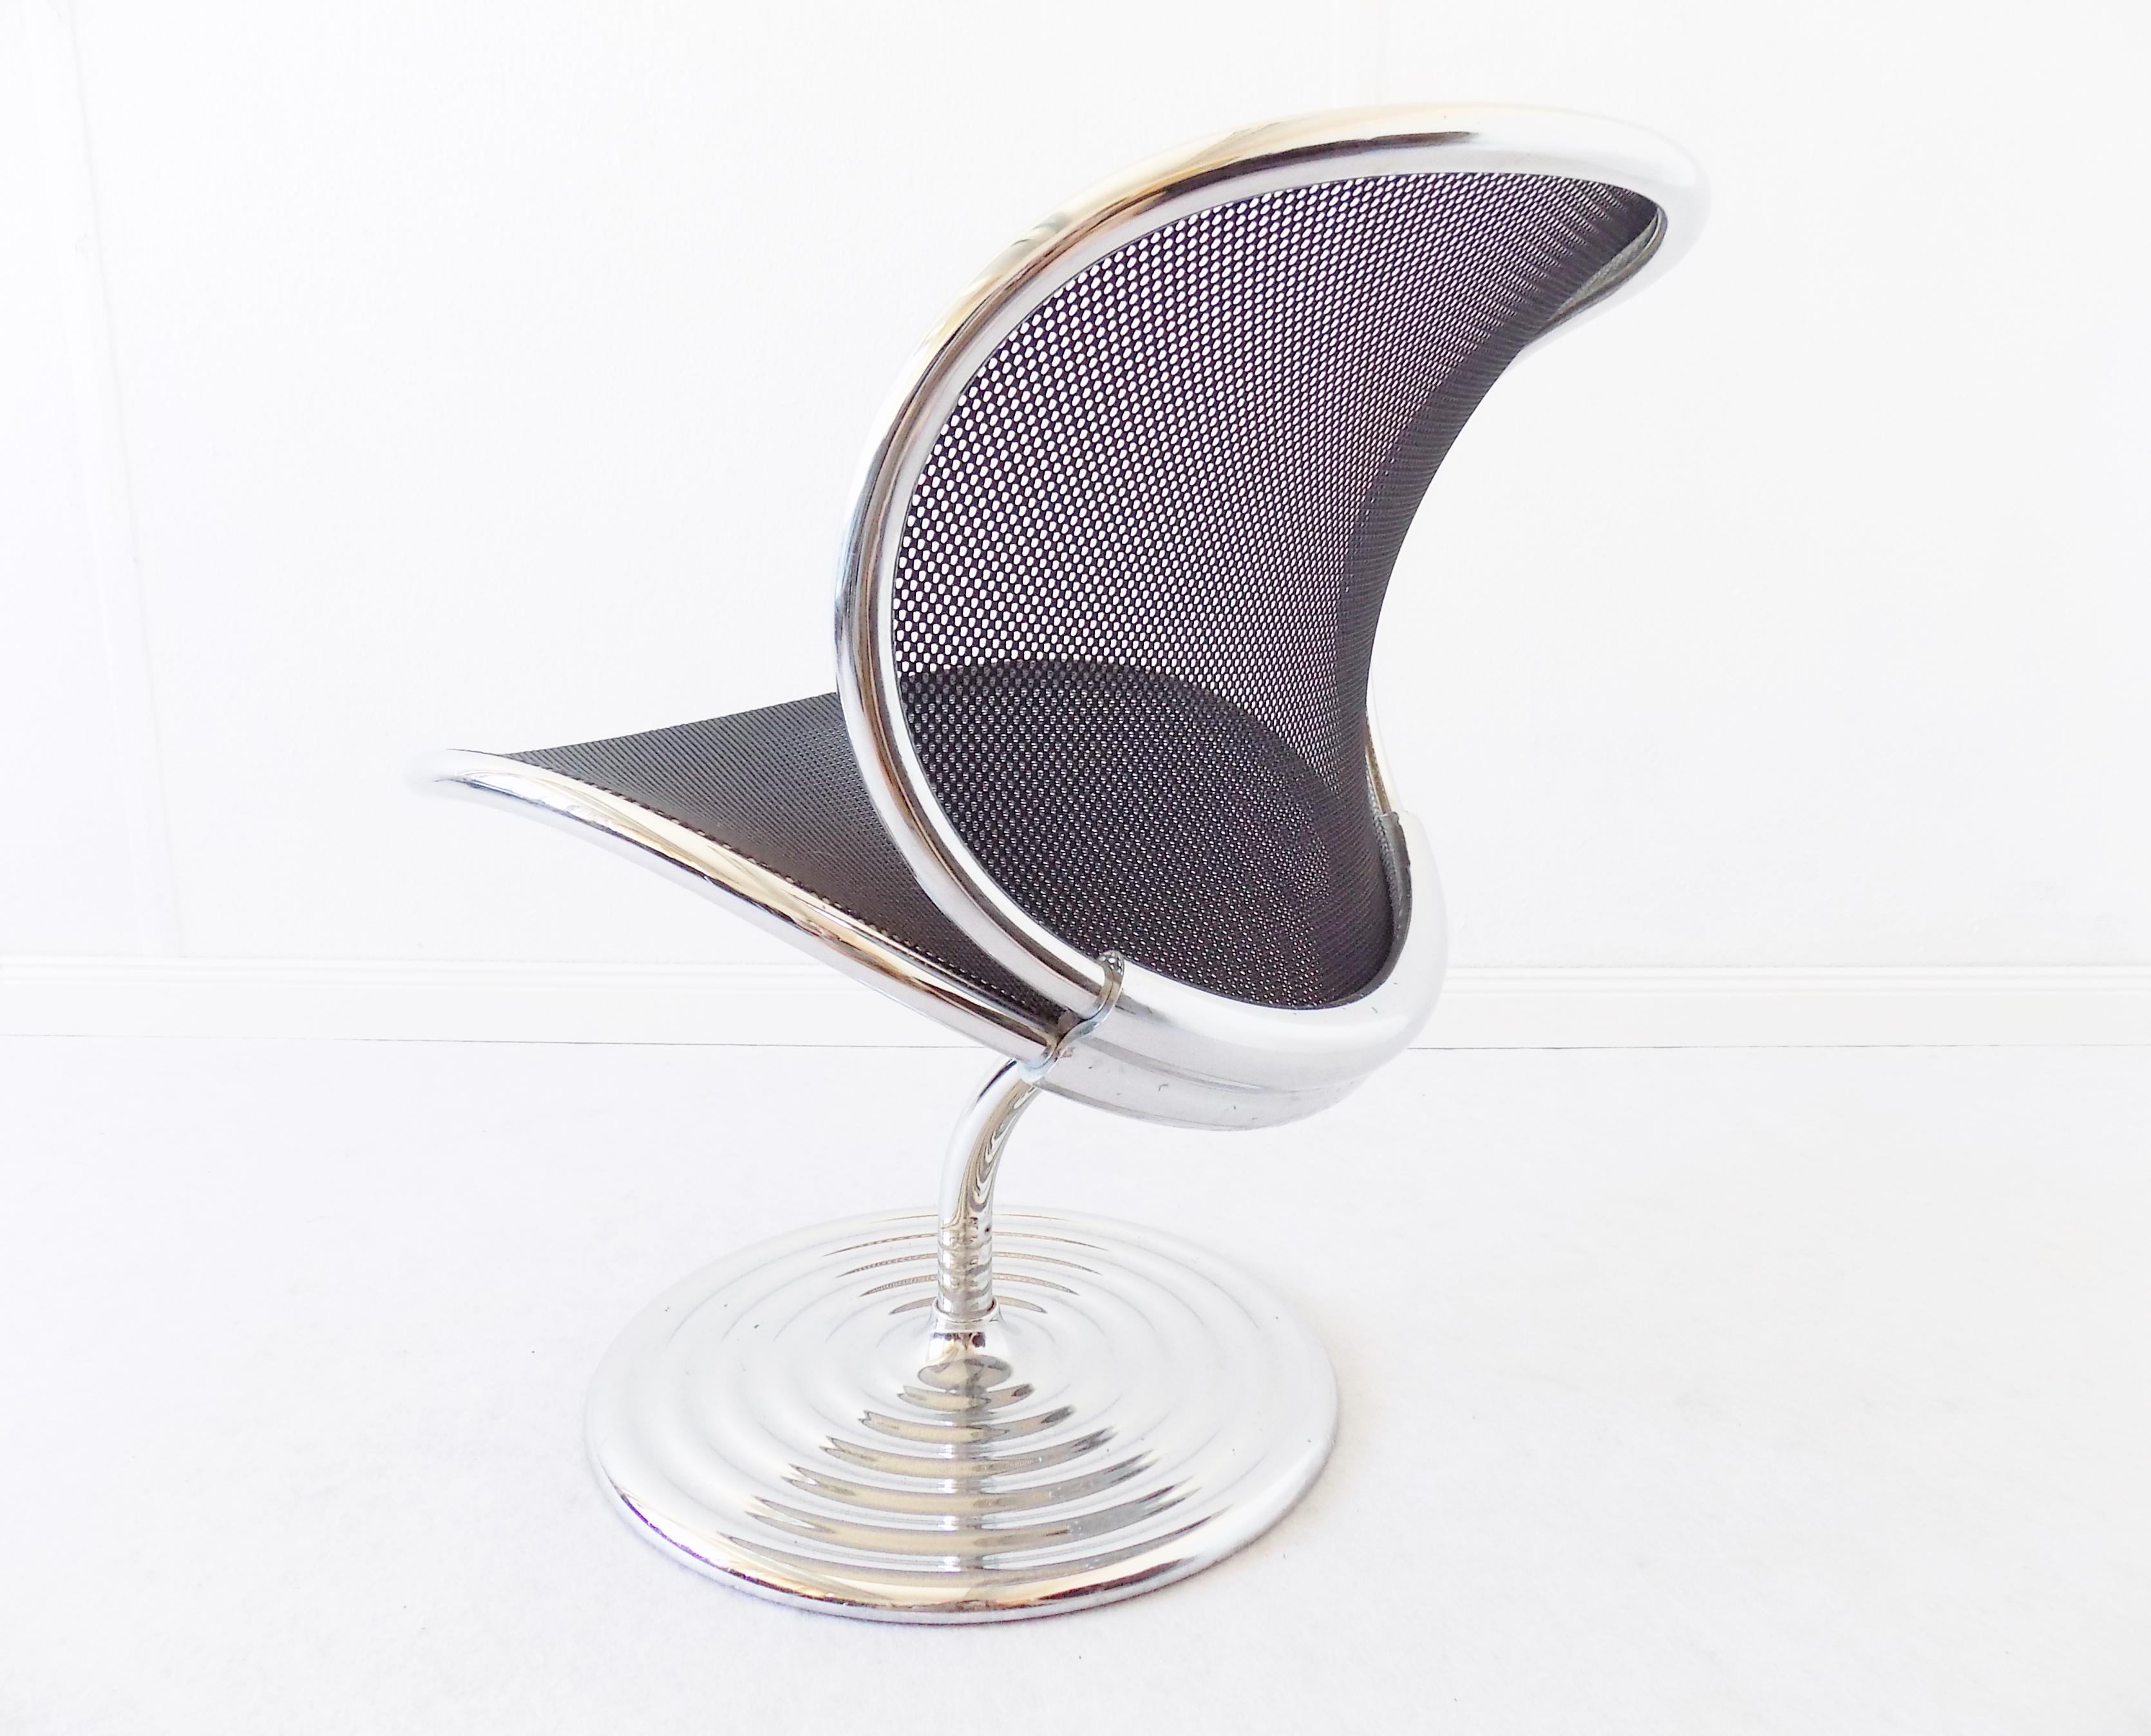 Wilkhahn O Line Lounge Chair by Herbert Ohl, German Design, swivel, contemporary

The Wilkhahn O Line was designed by Herbert Ohl in 1982. This Lounge chair in Chrome and a black mesh covering offers great seating comfort in a first class designer